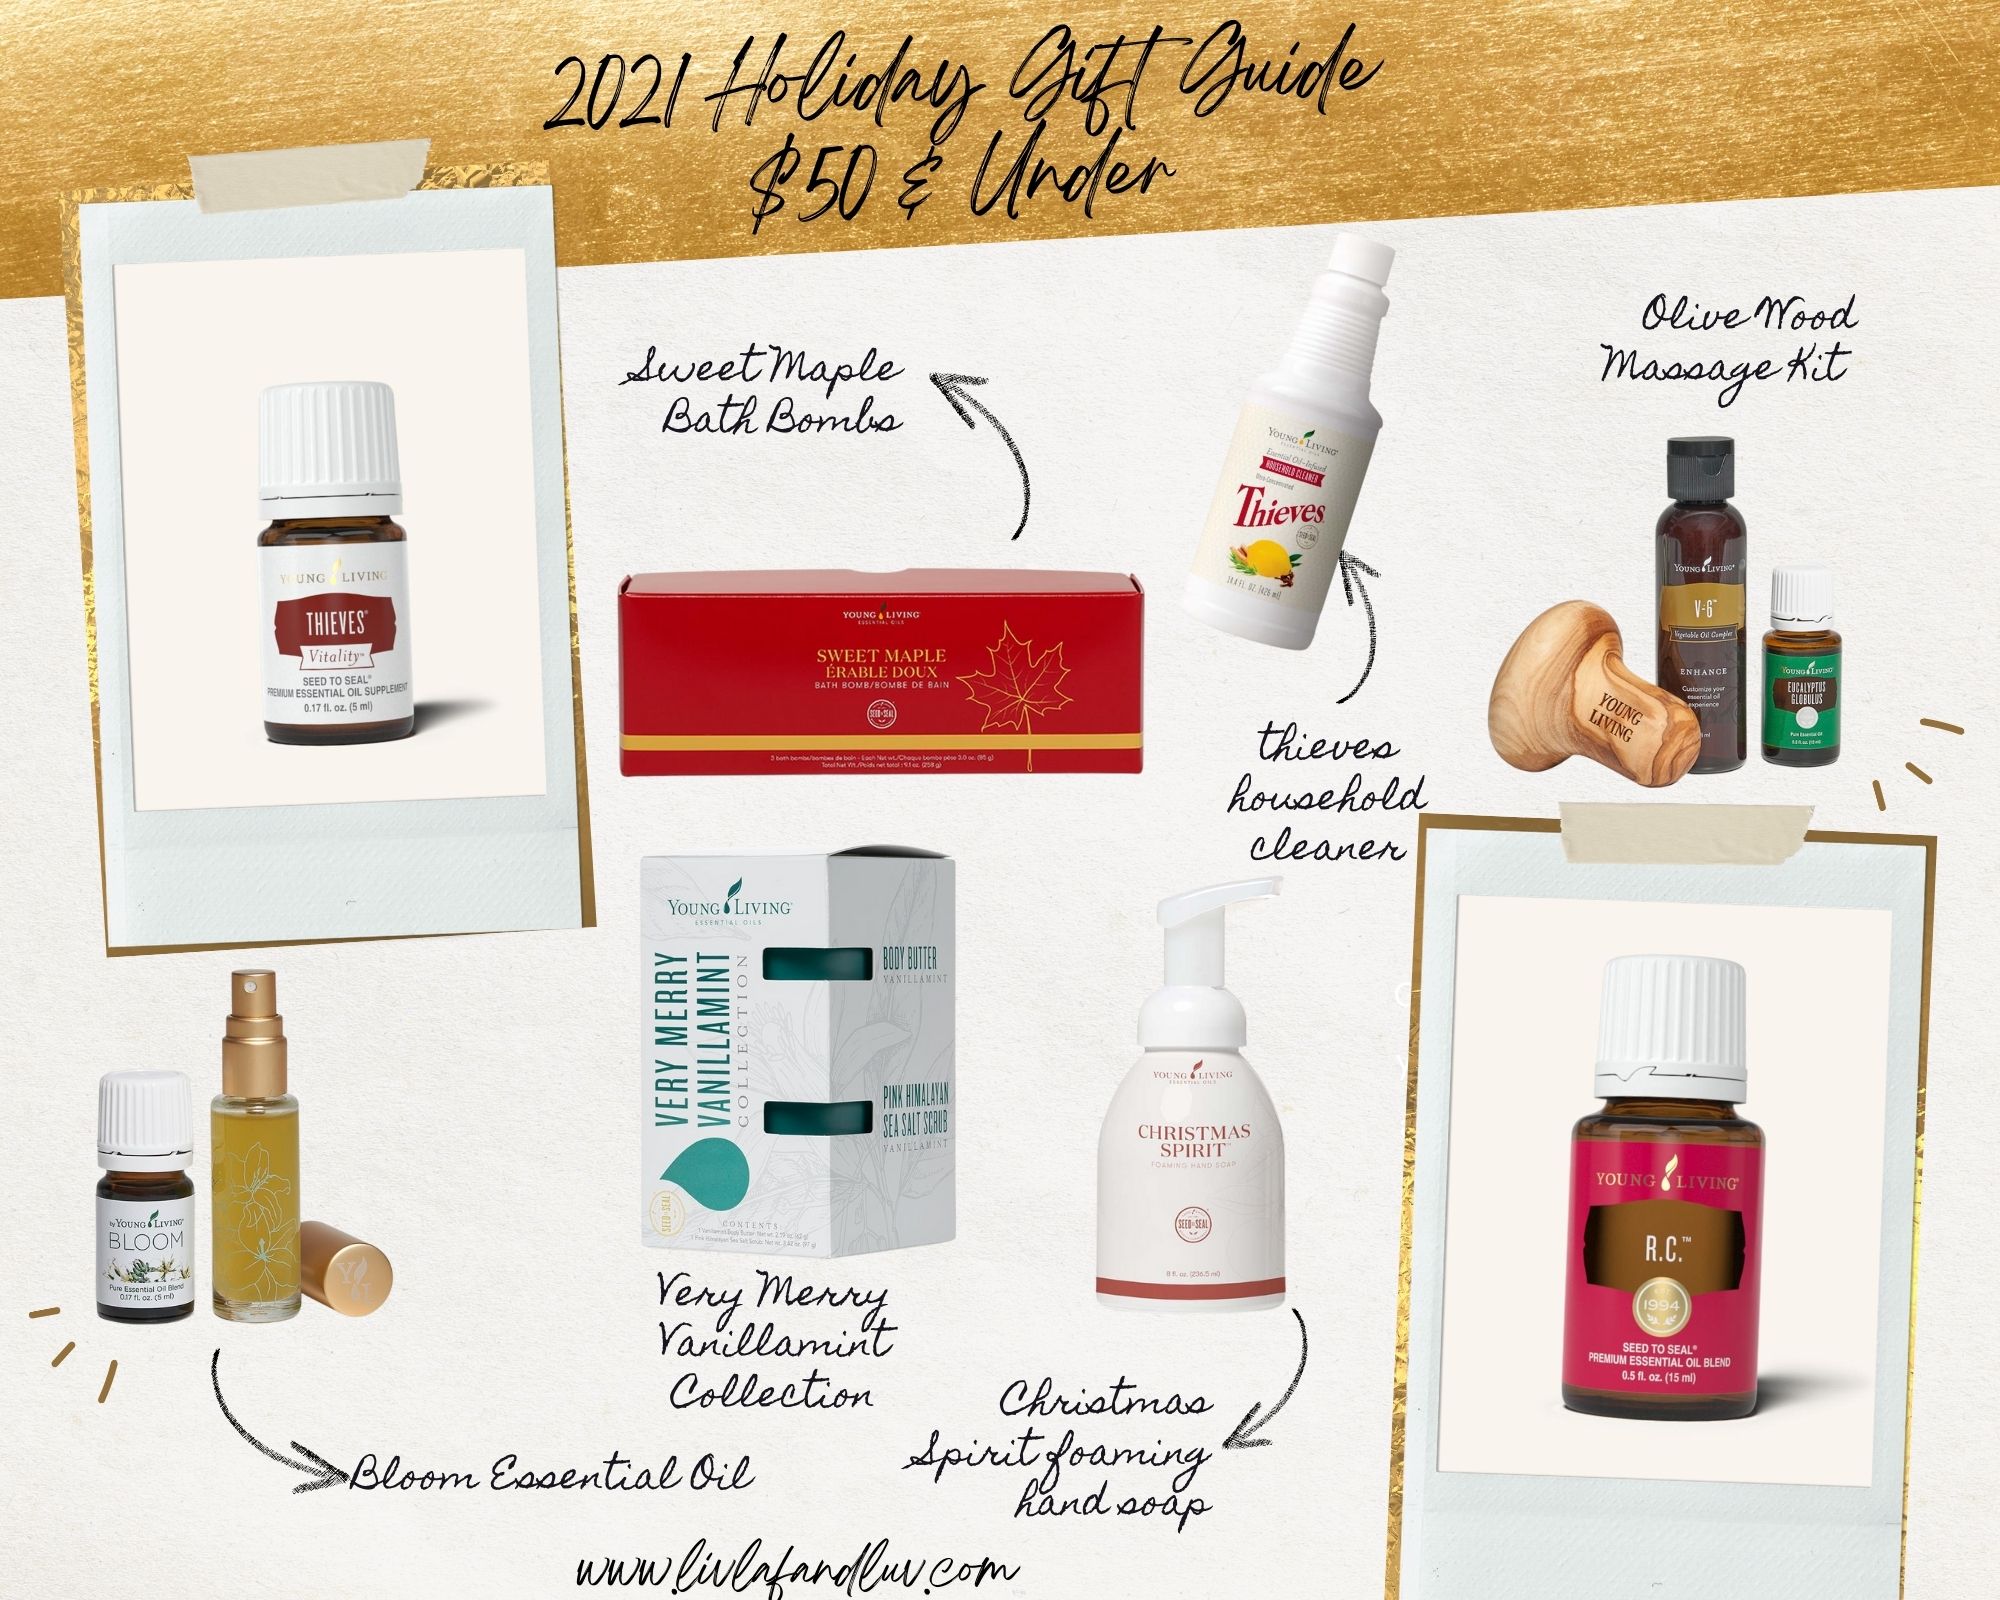 wellness gift guide $50 and under